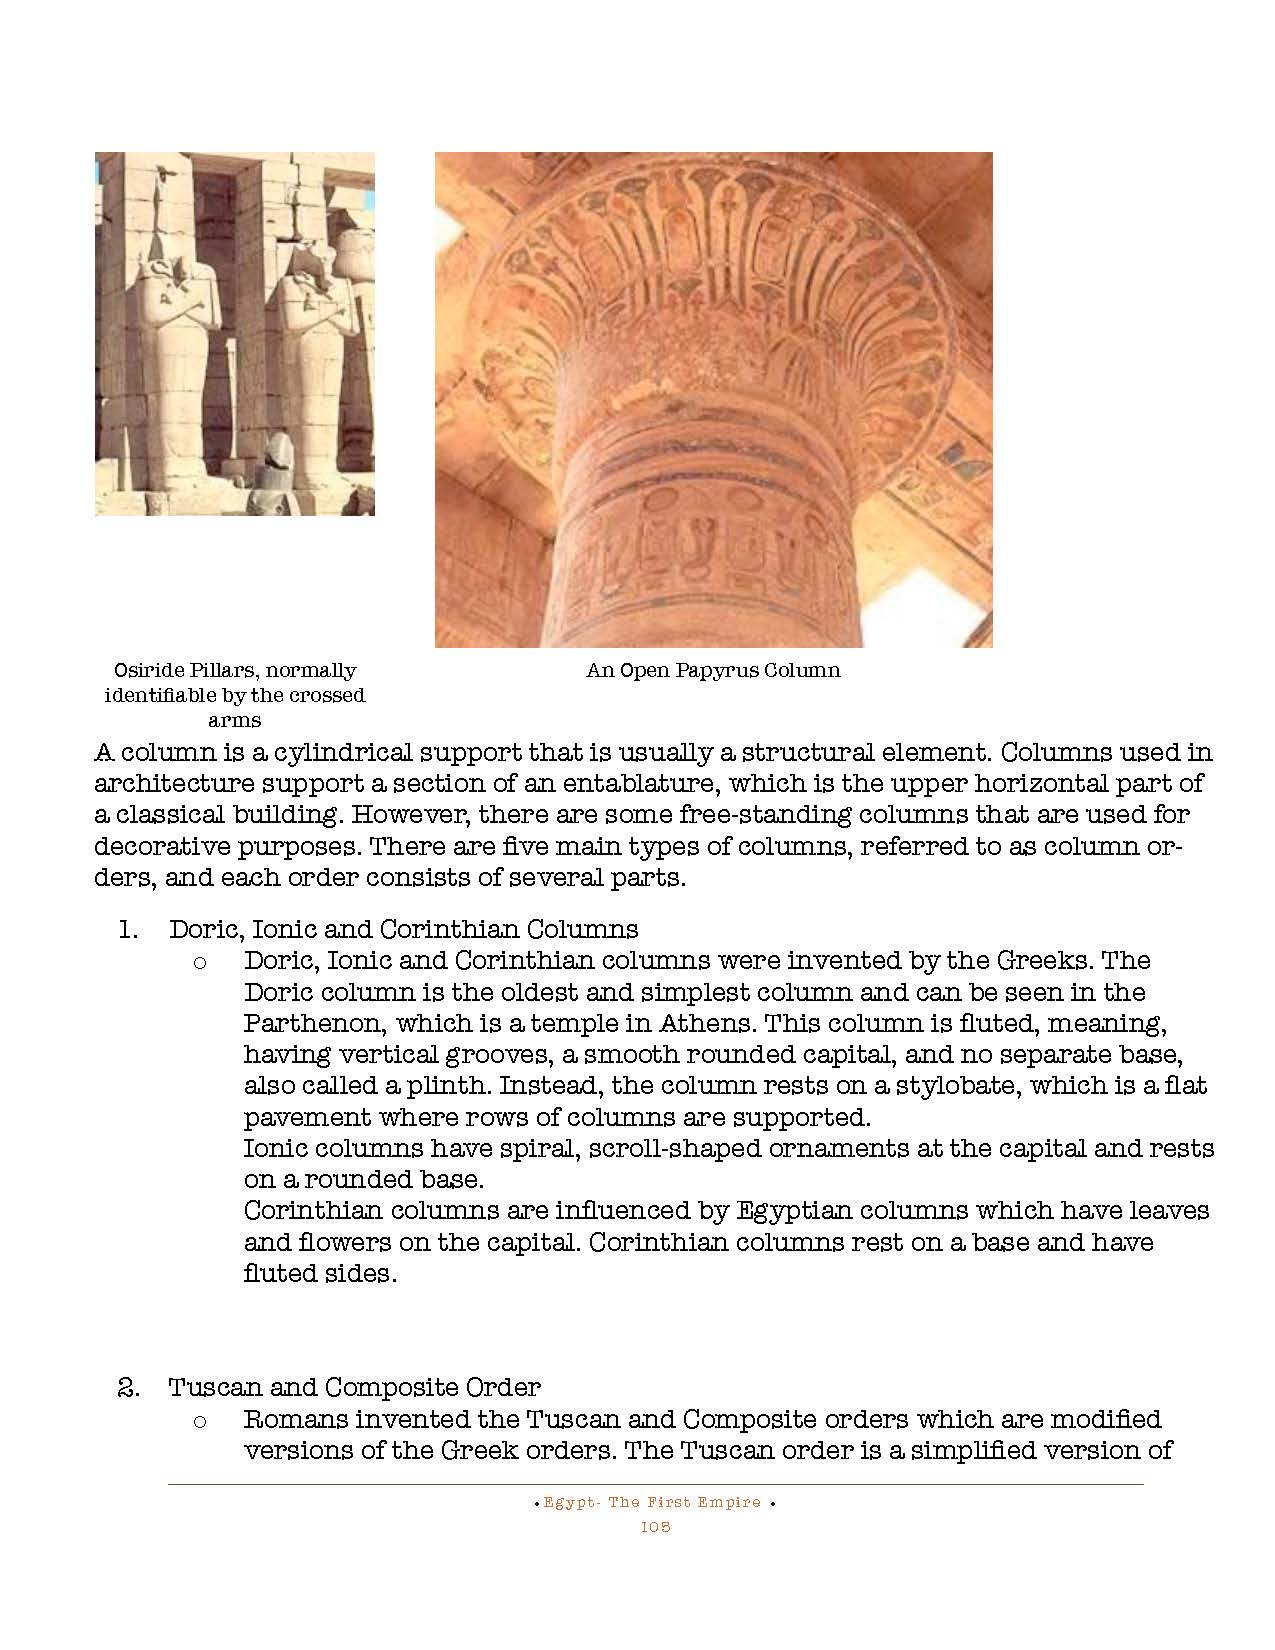 HOCE- Egypt  (First Empire) Notes_Page_105.jpg